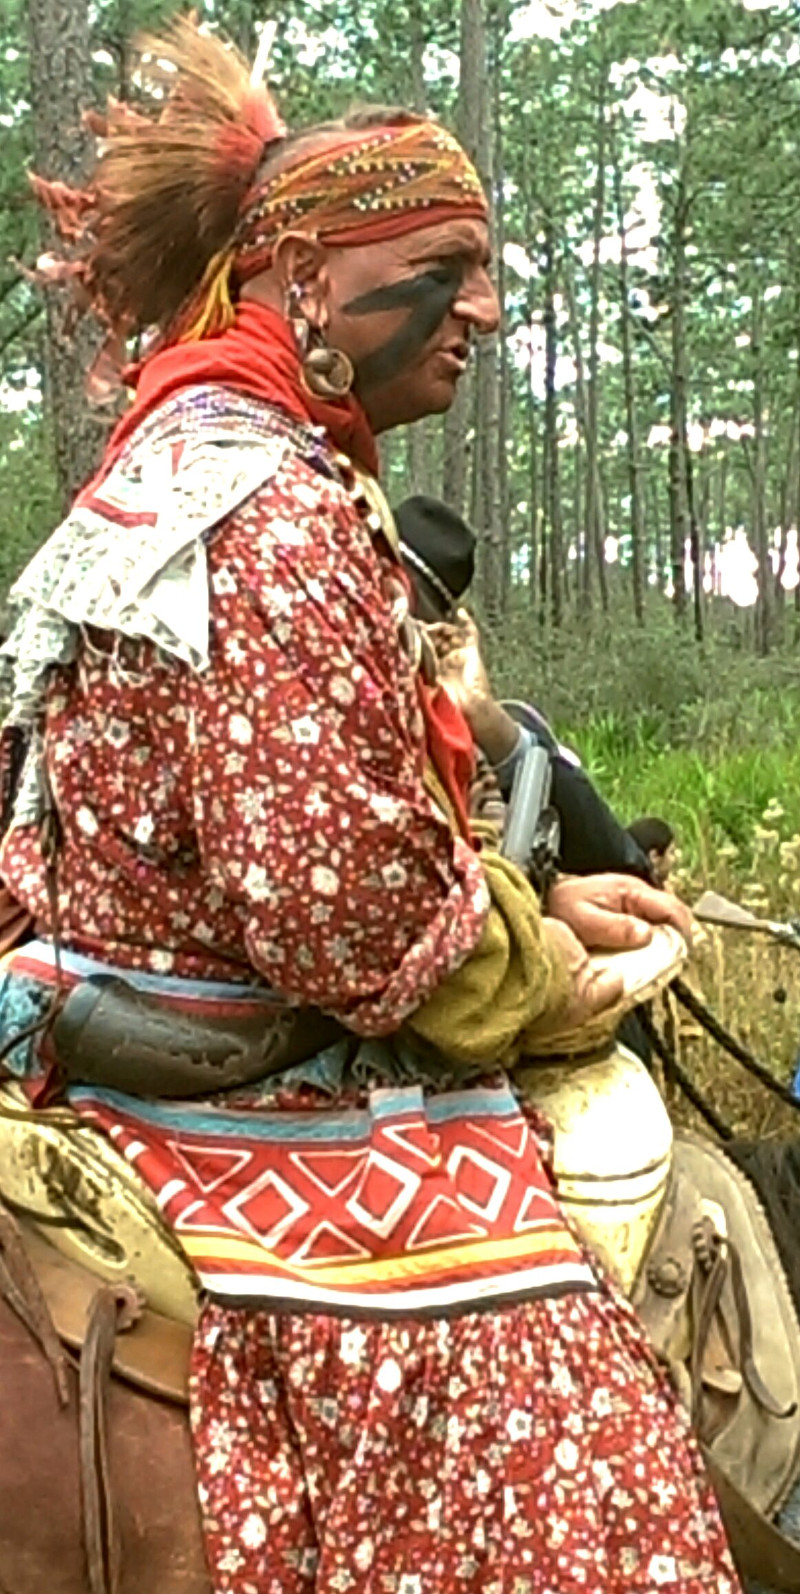 a seminole warrior reenactor in a colorful outfit rides a horse.